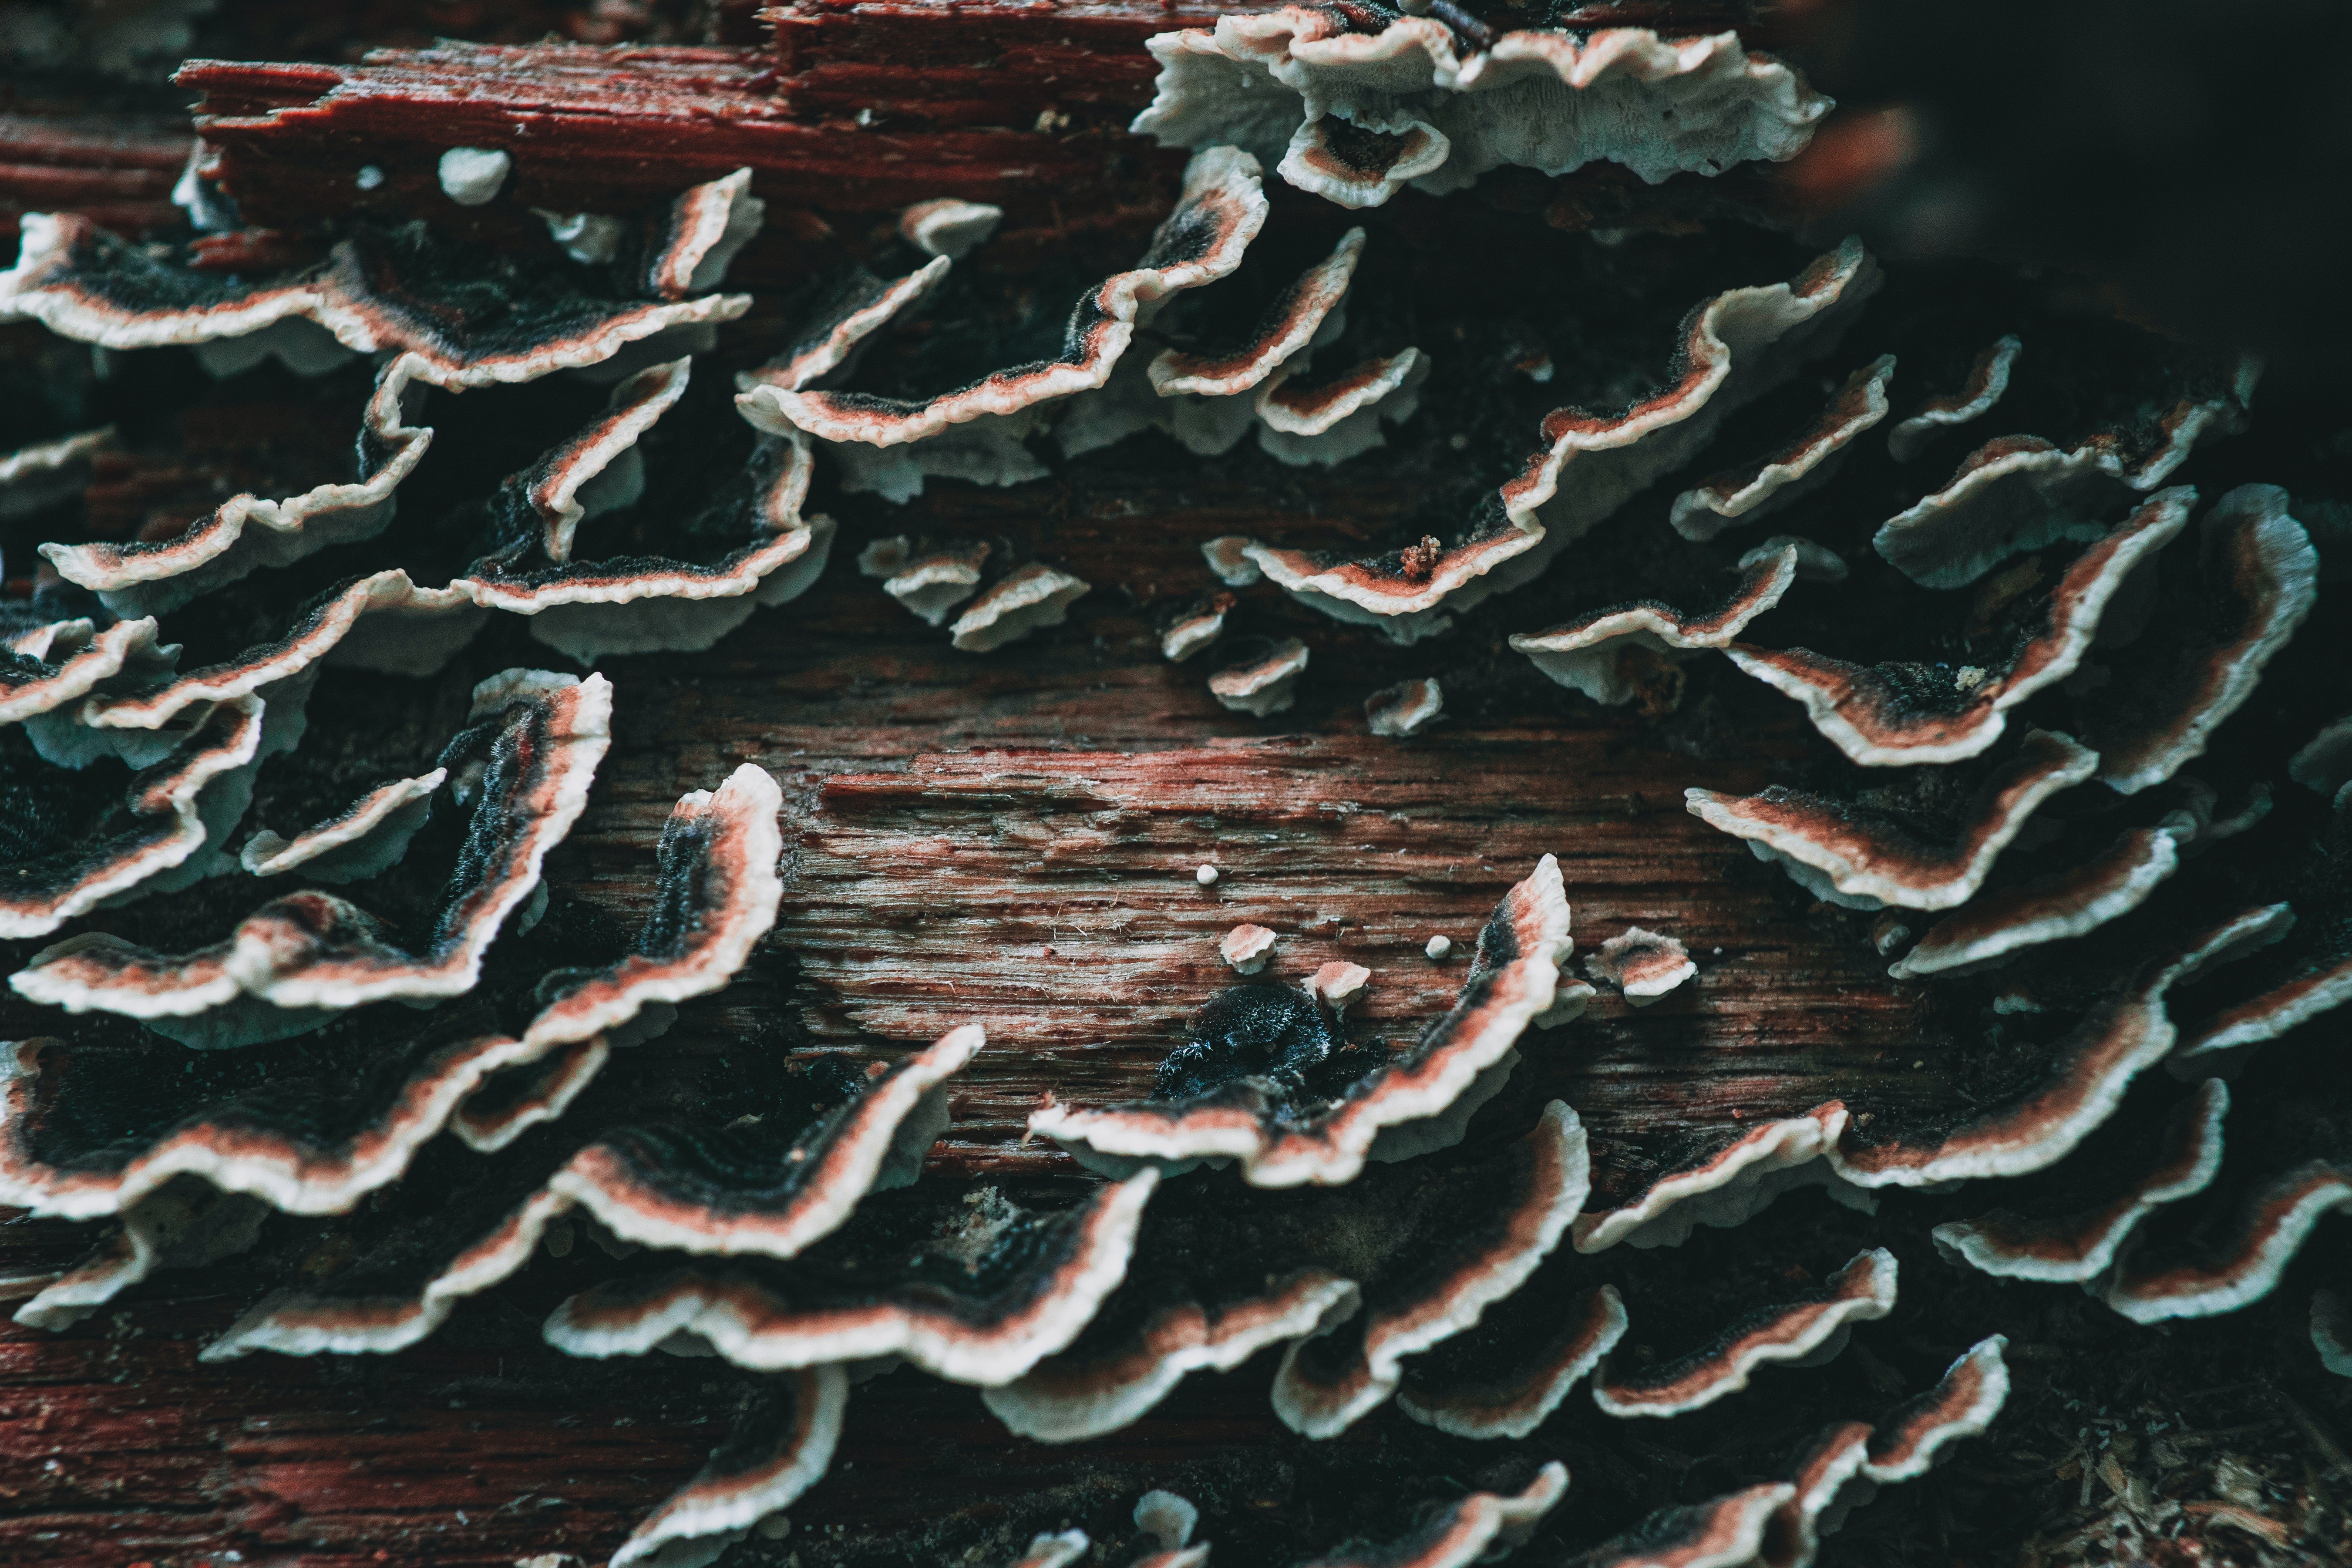 Turkey Tail Mushroom Benefits: A Comprehensive Guide to This Superfood